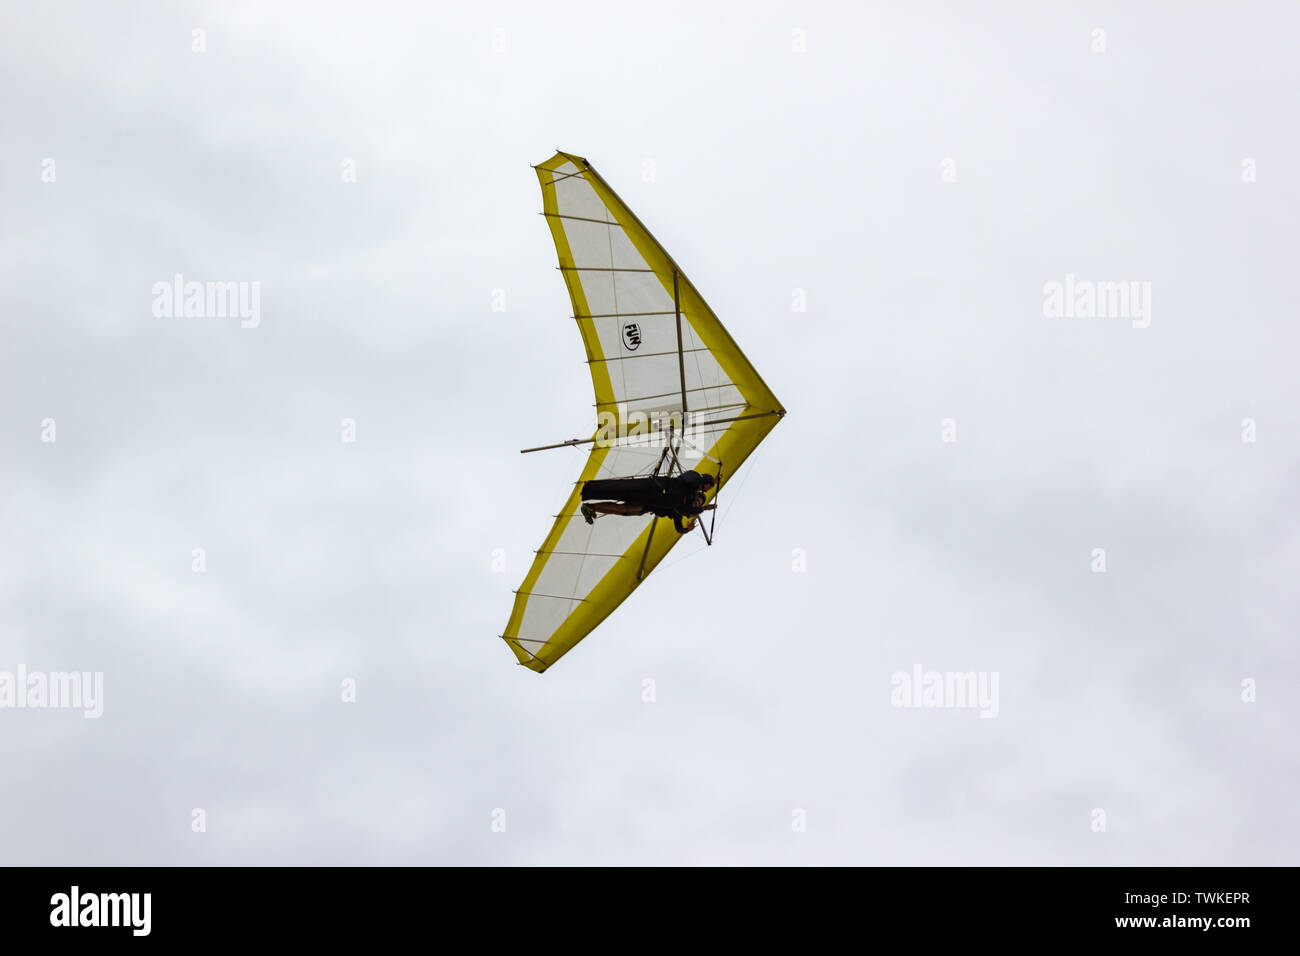 Hang glider flying in Newcastle, New South Wales, Australia Stock Photo